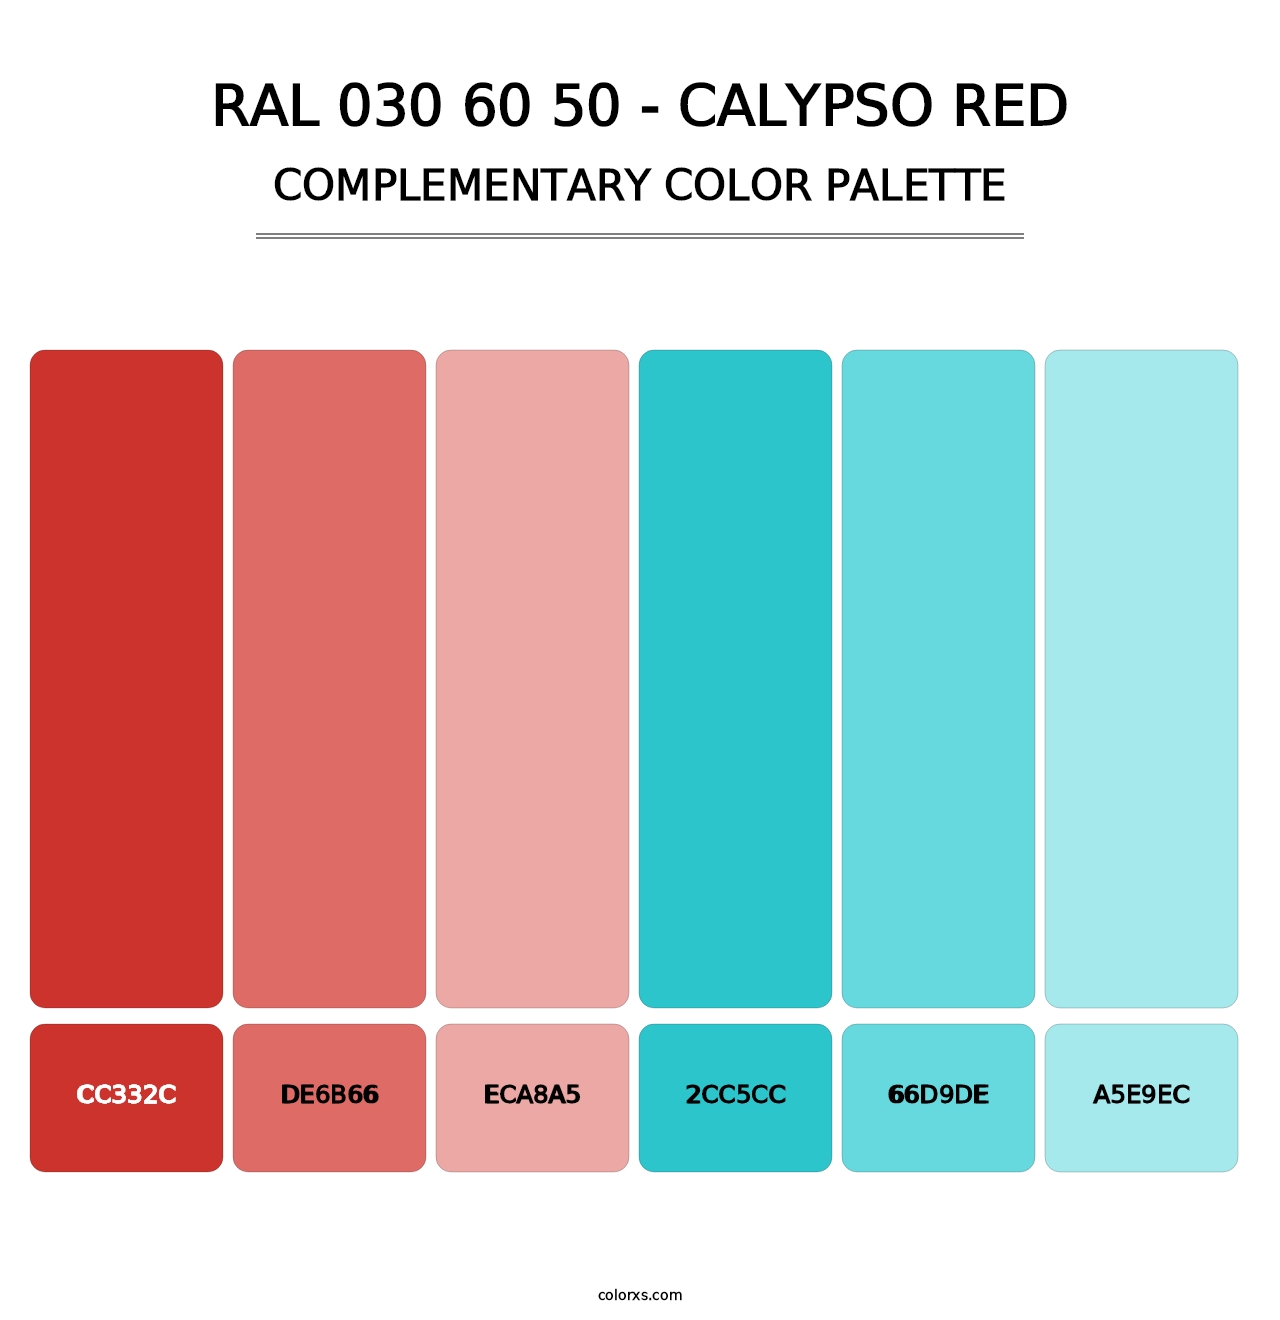 RAL 030 60 50 - Calypso Red - Complementary Color Palette